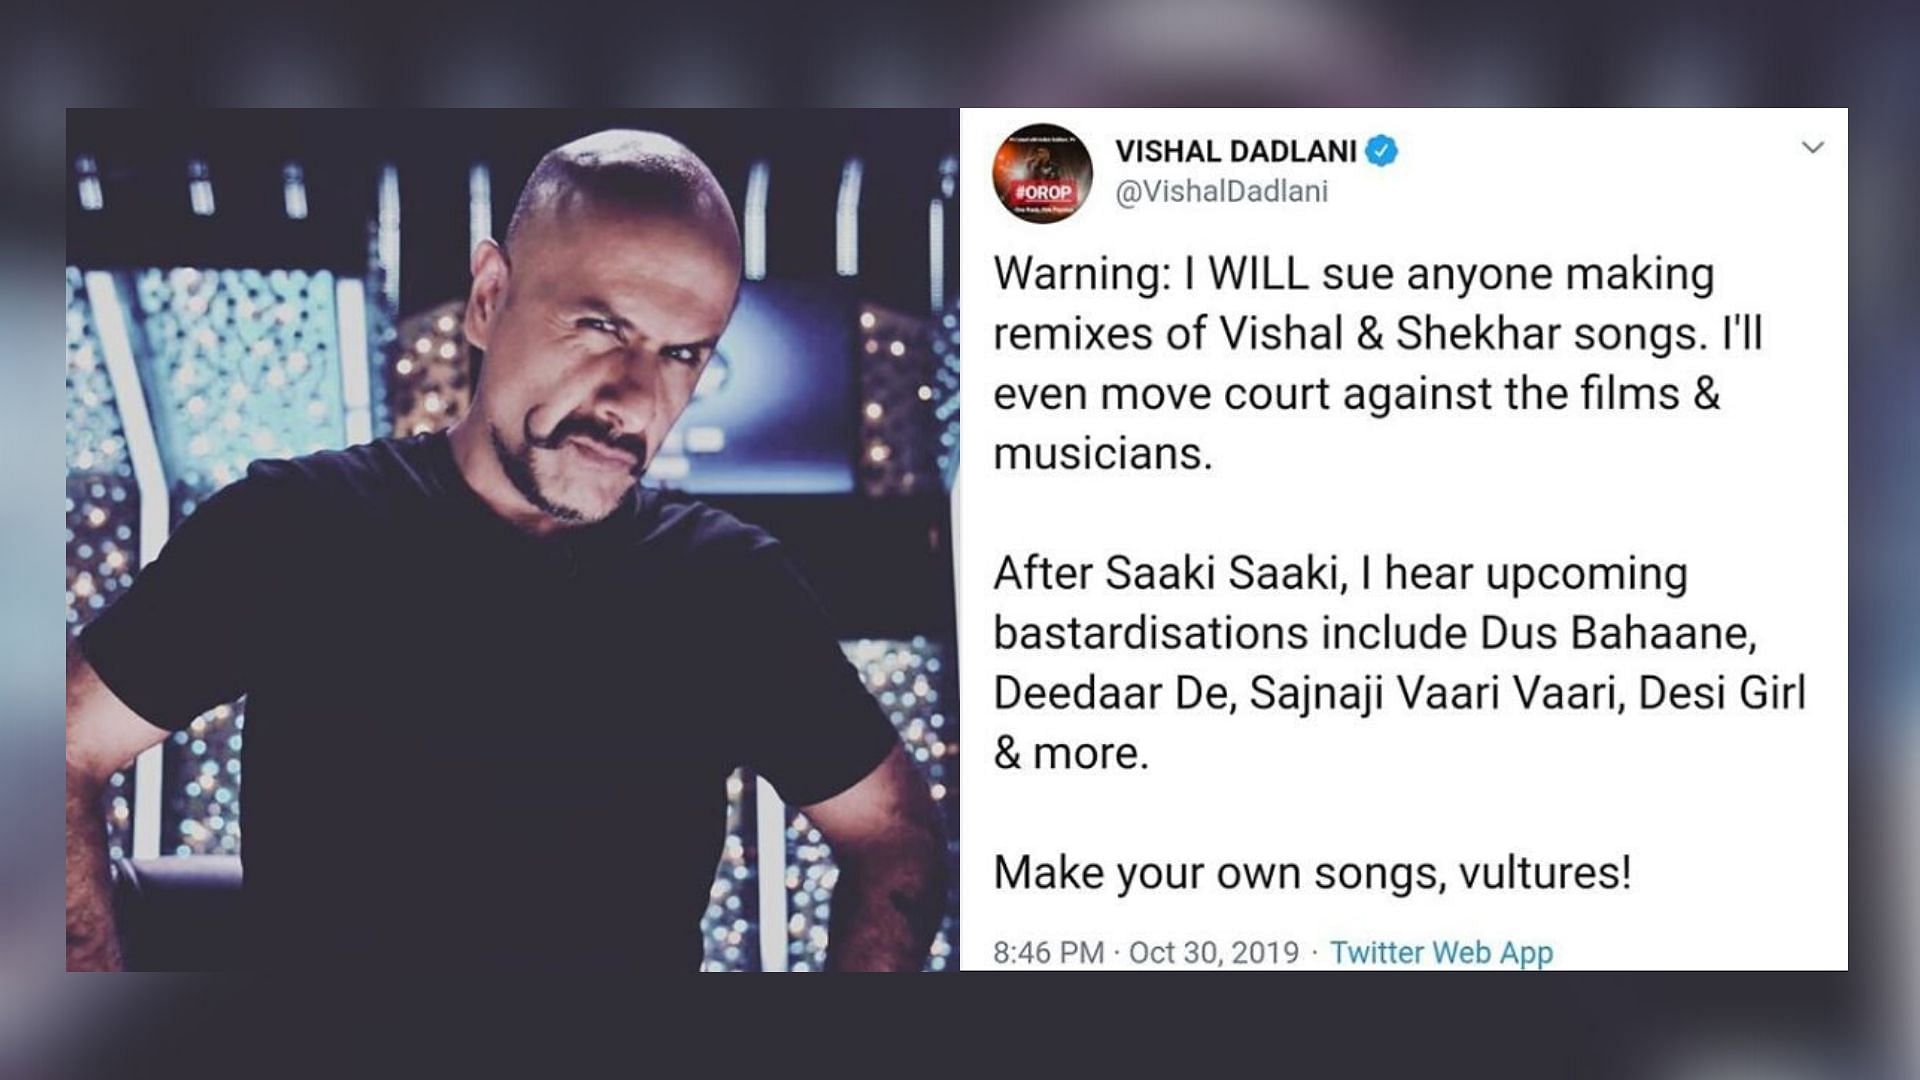 Here’s why Vishal Dadlani is so upset with musicians in the film industry.